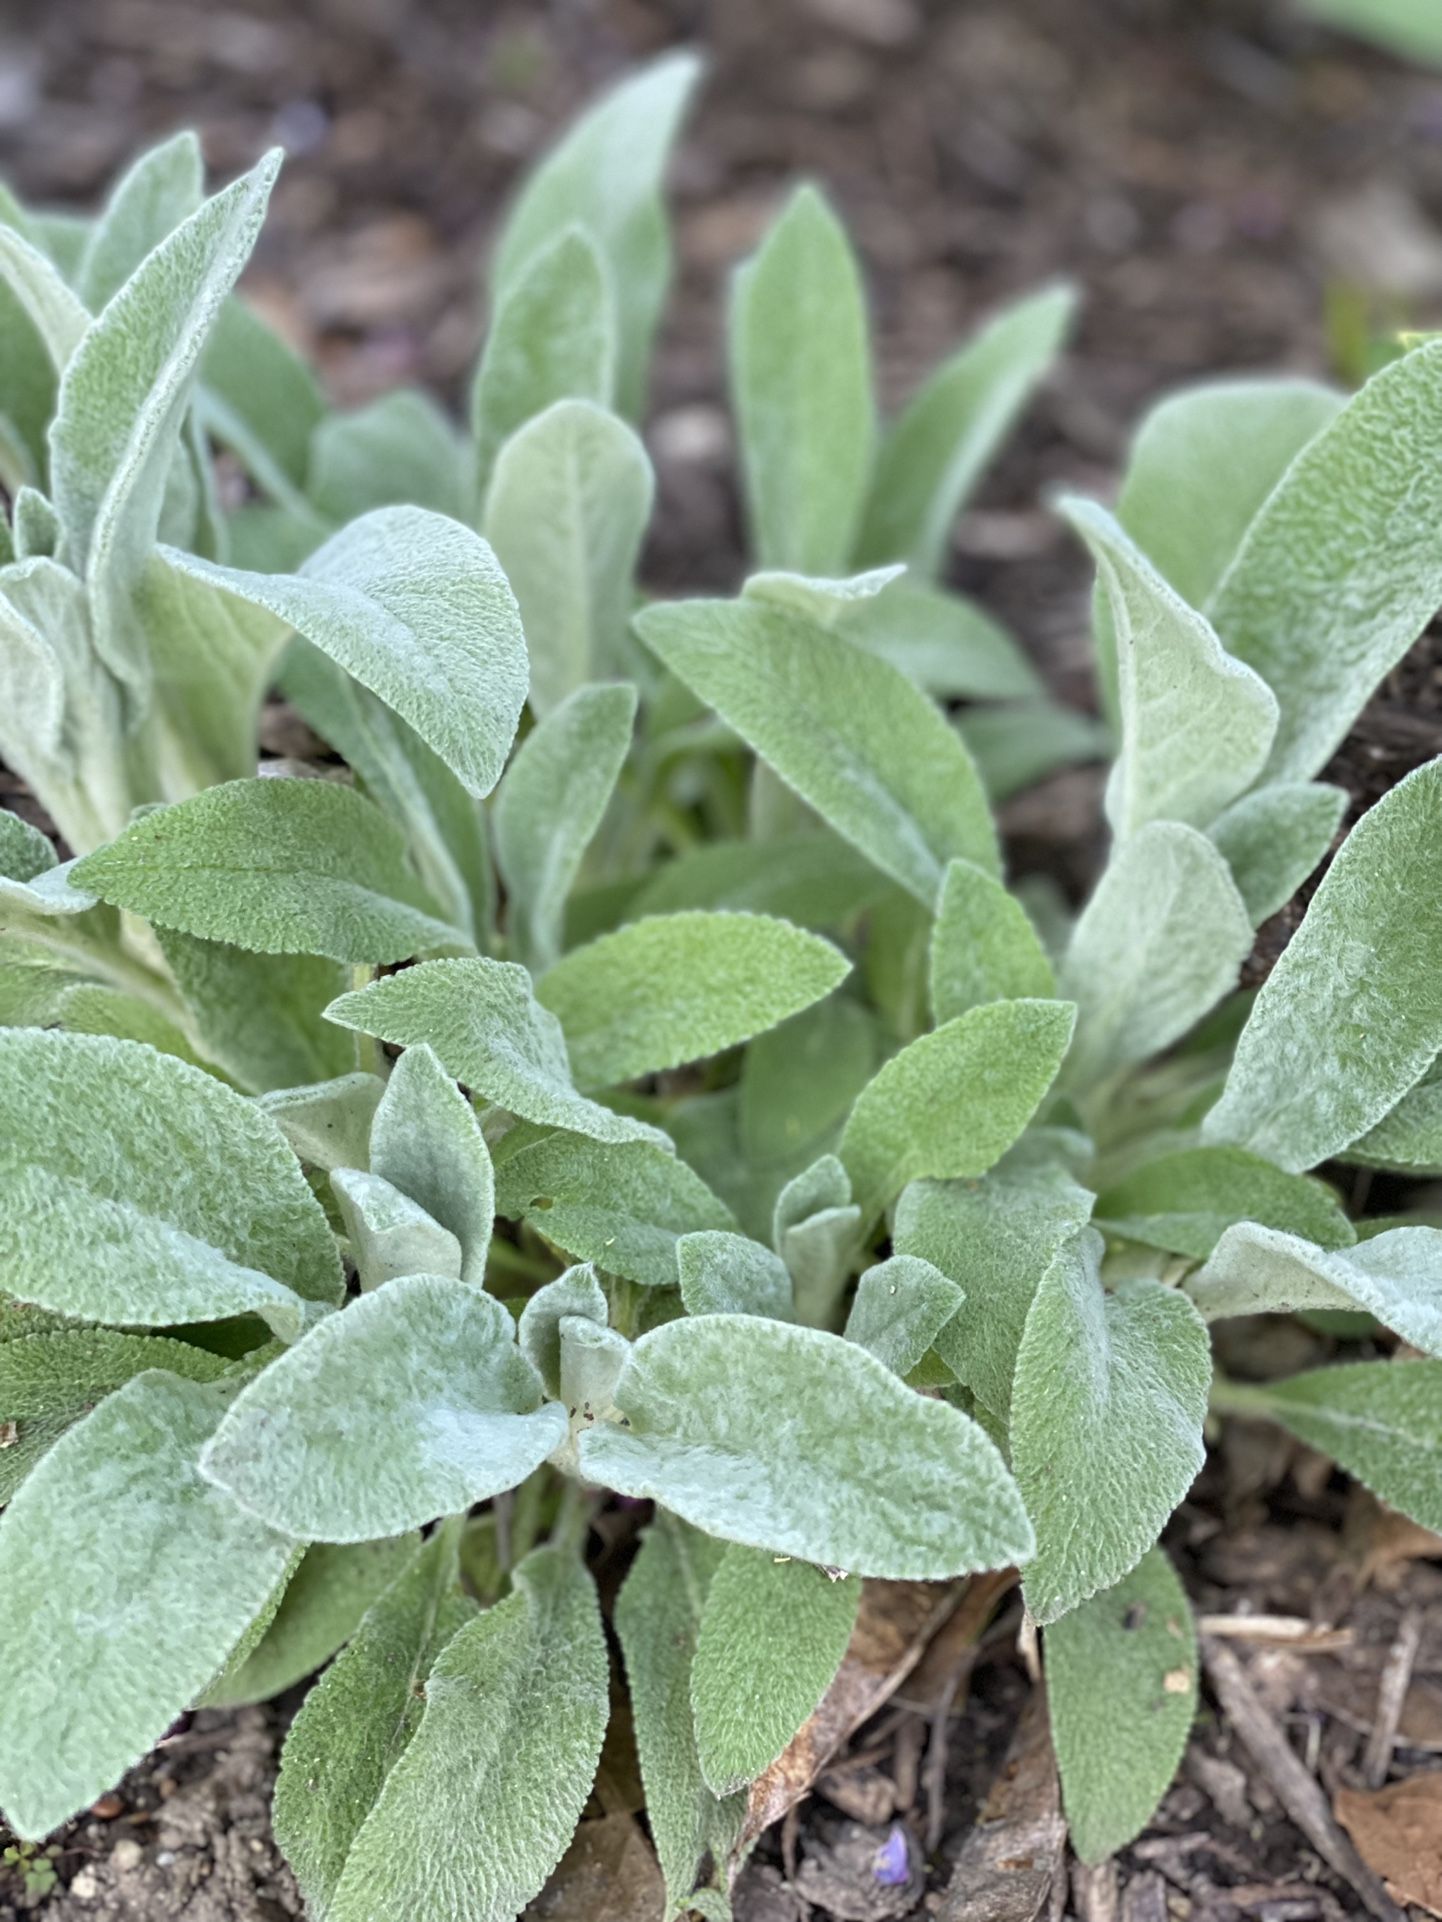 Lamb’s Ear -Deer/Rabbit resistant Perennial ground cover, fast growing but not invasive,NO MORE WEED